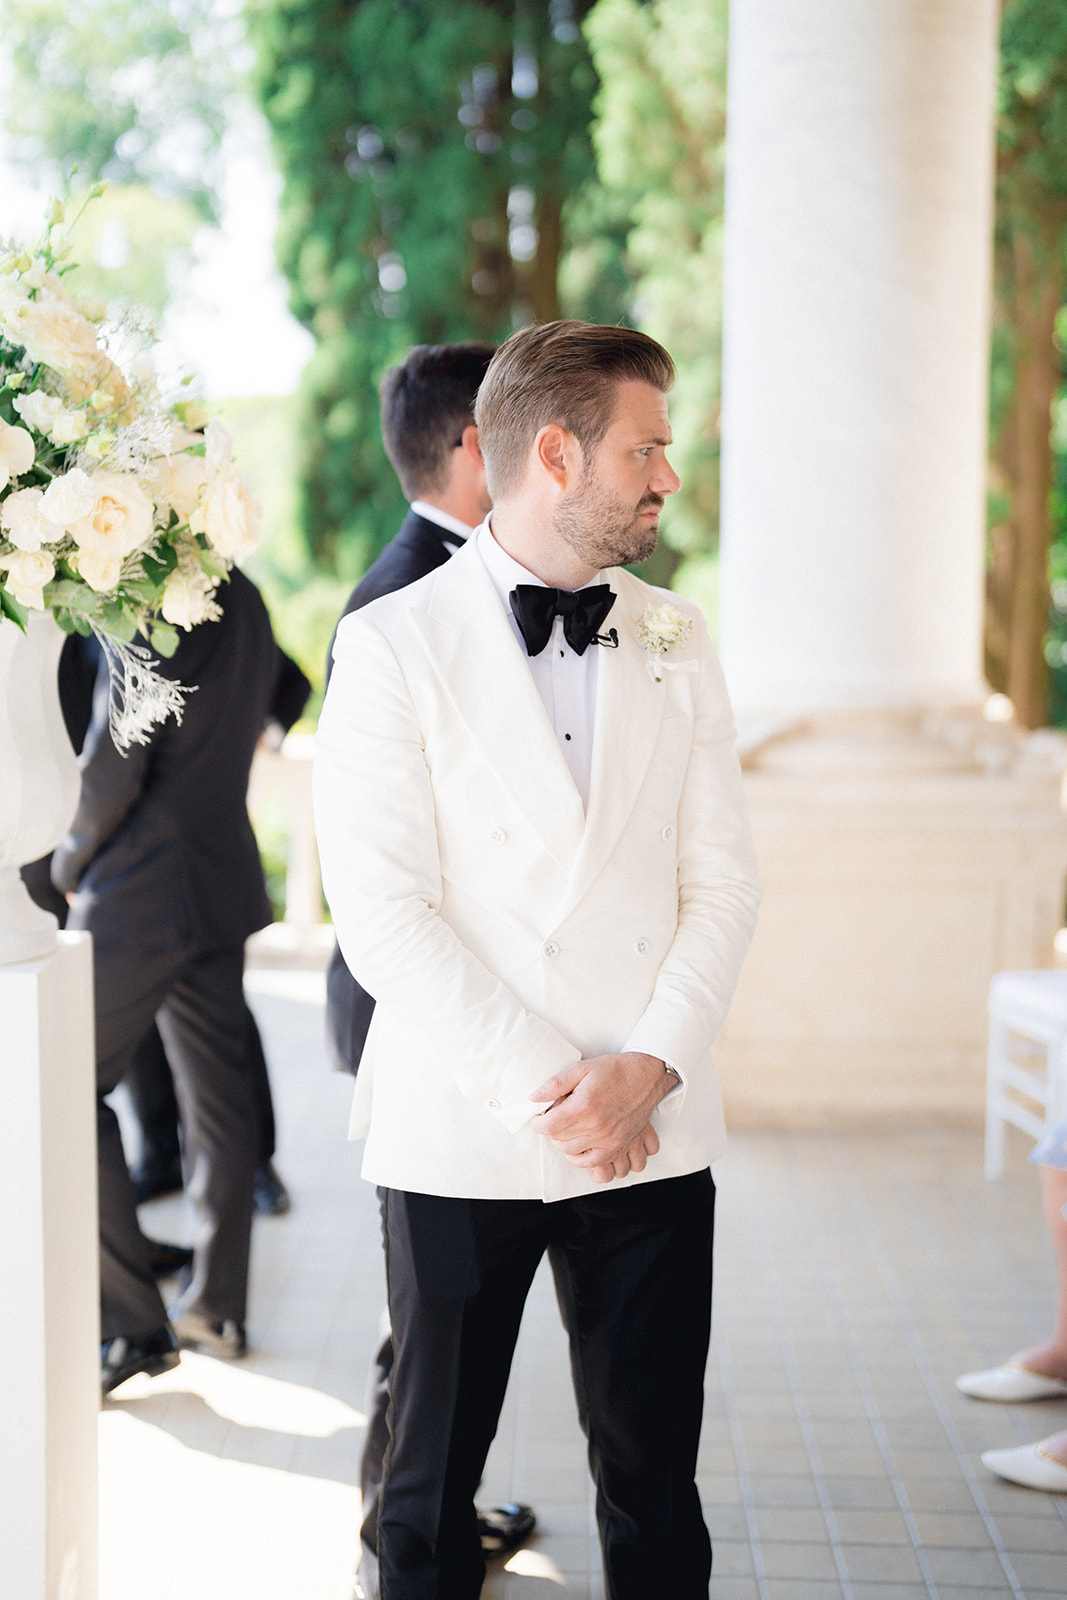 The groom waiting for the bride's arrival, dressed in his tuxedo, for the wedding ceremony at Isola del Garda